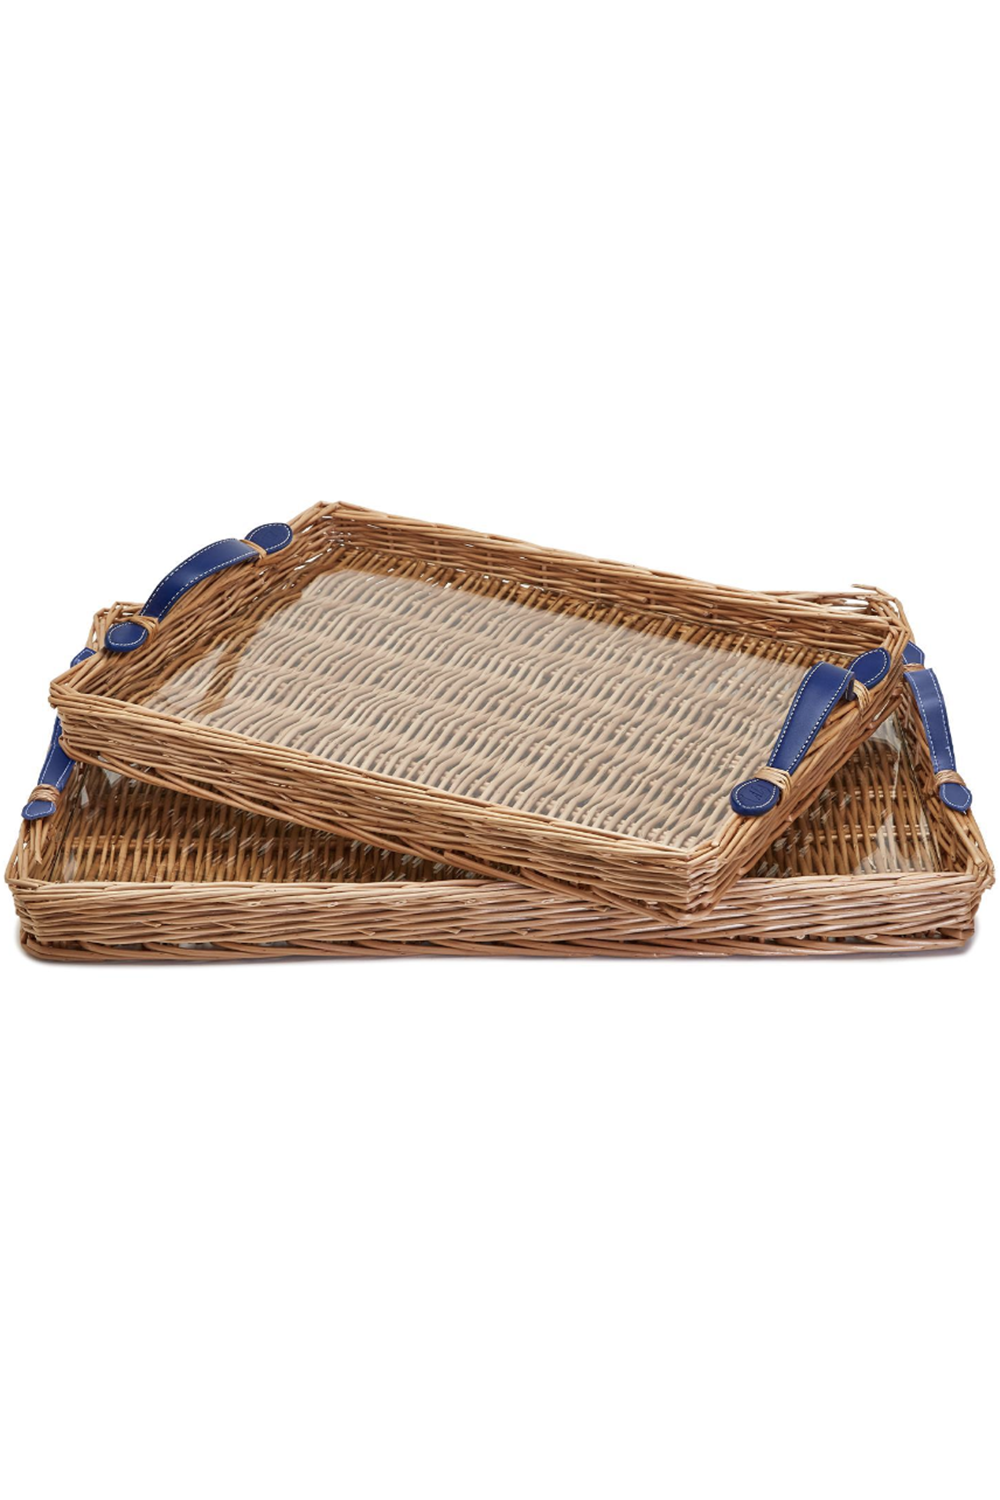 Wicker Rectangle Serving Tray